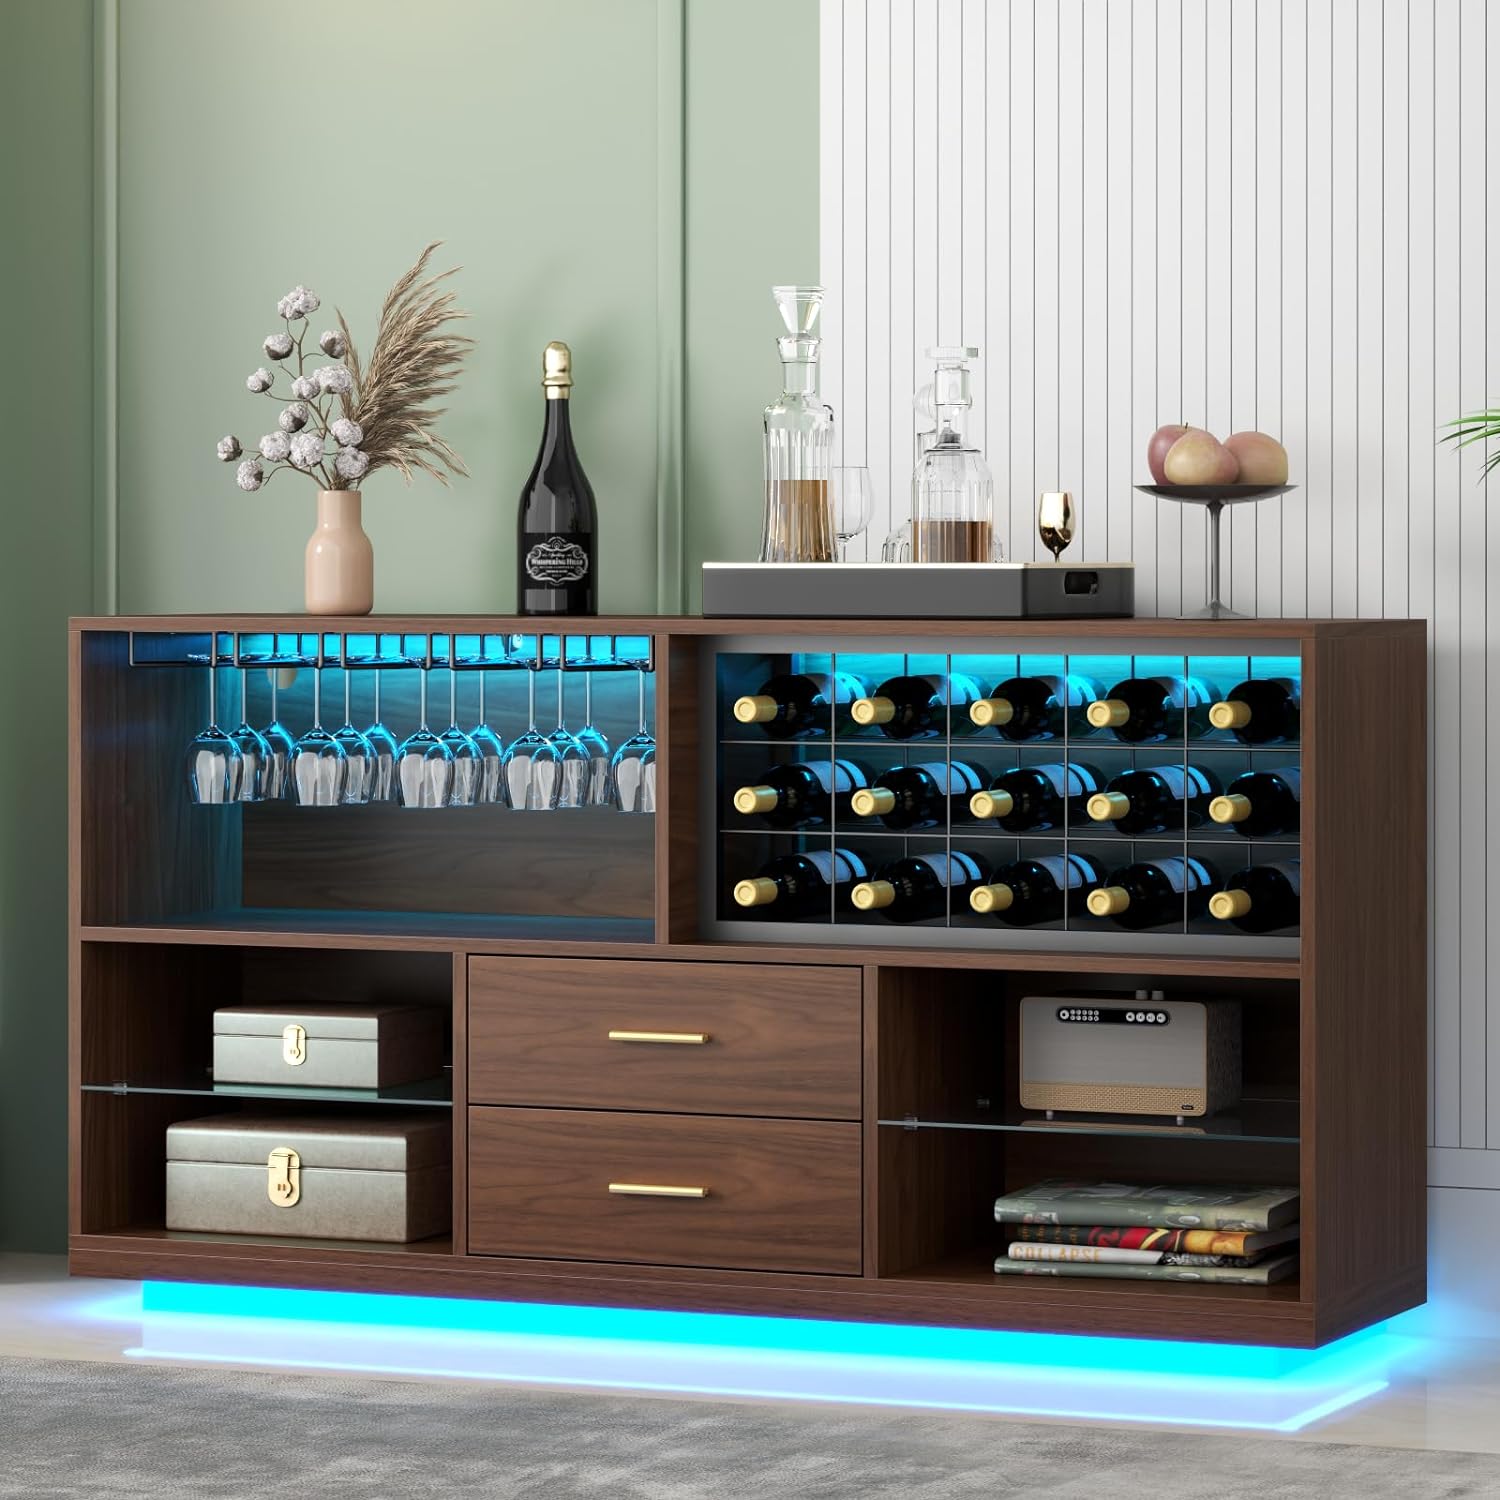 Gyfimoie Wine Bar Cabinet with Drawers and LED Lights - image 4 of 5